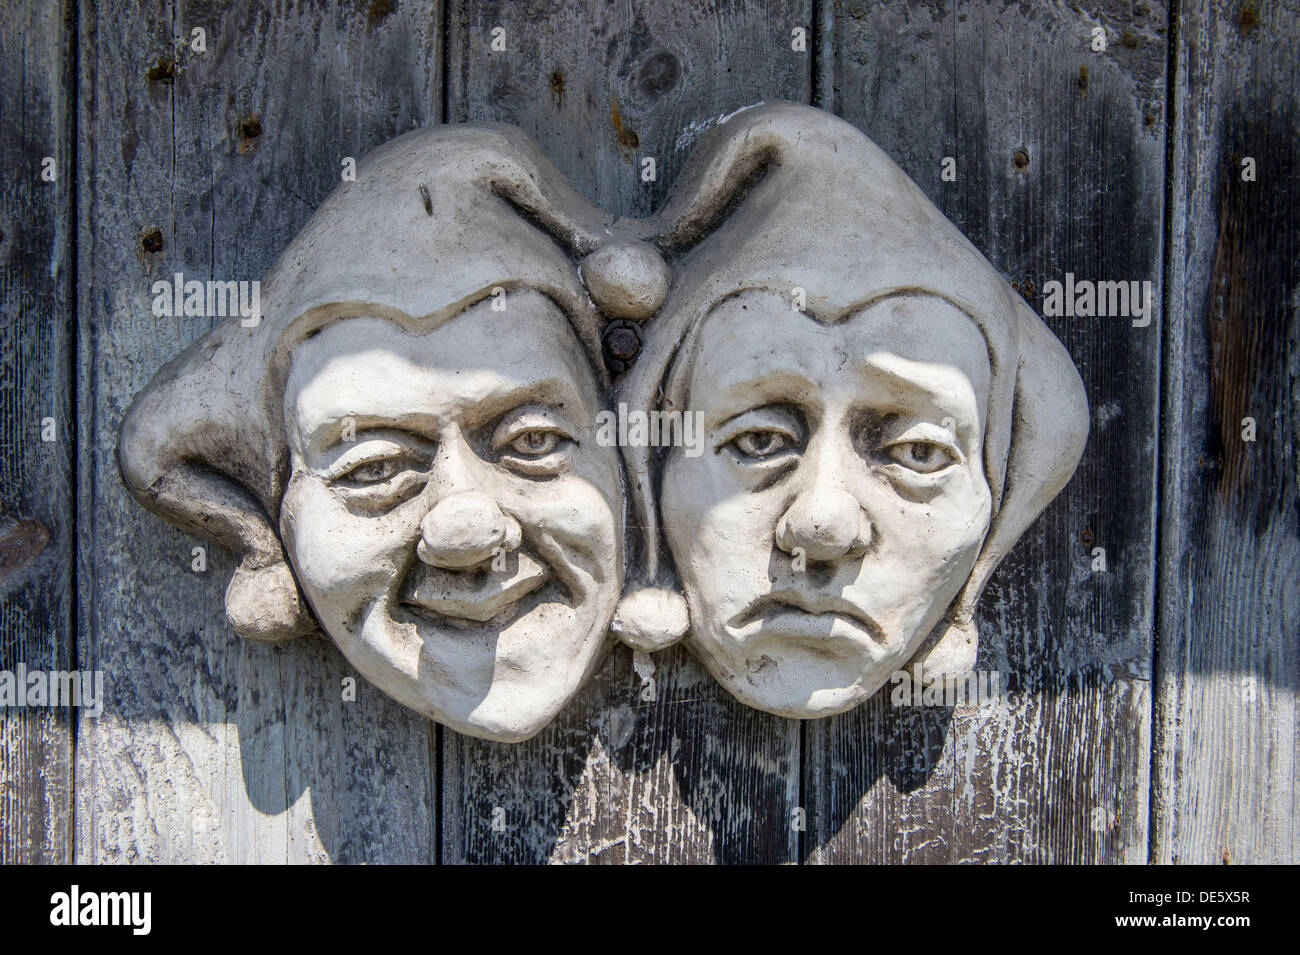 Commedia dell’arte sculpture faces made of pottery on a wooden door, UK Stock Photo